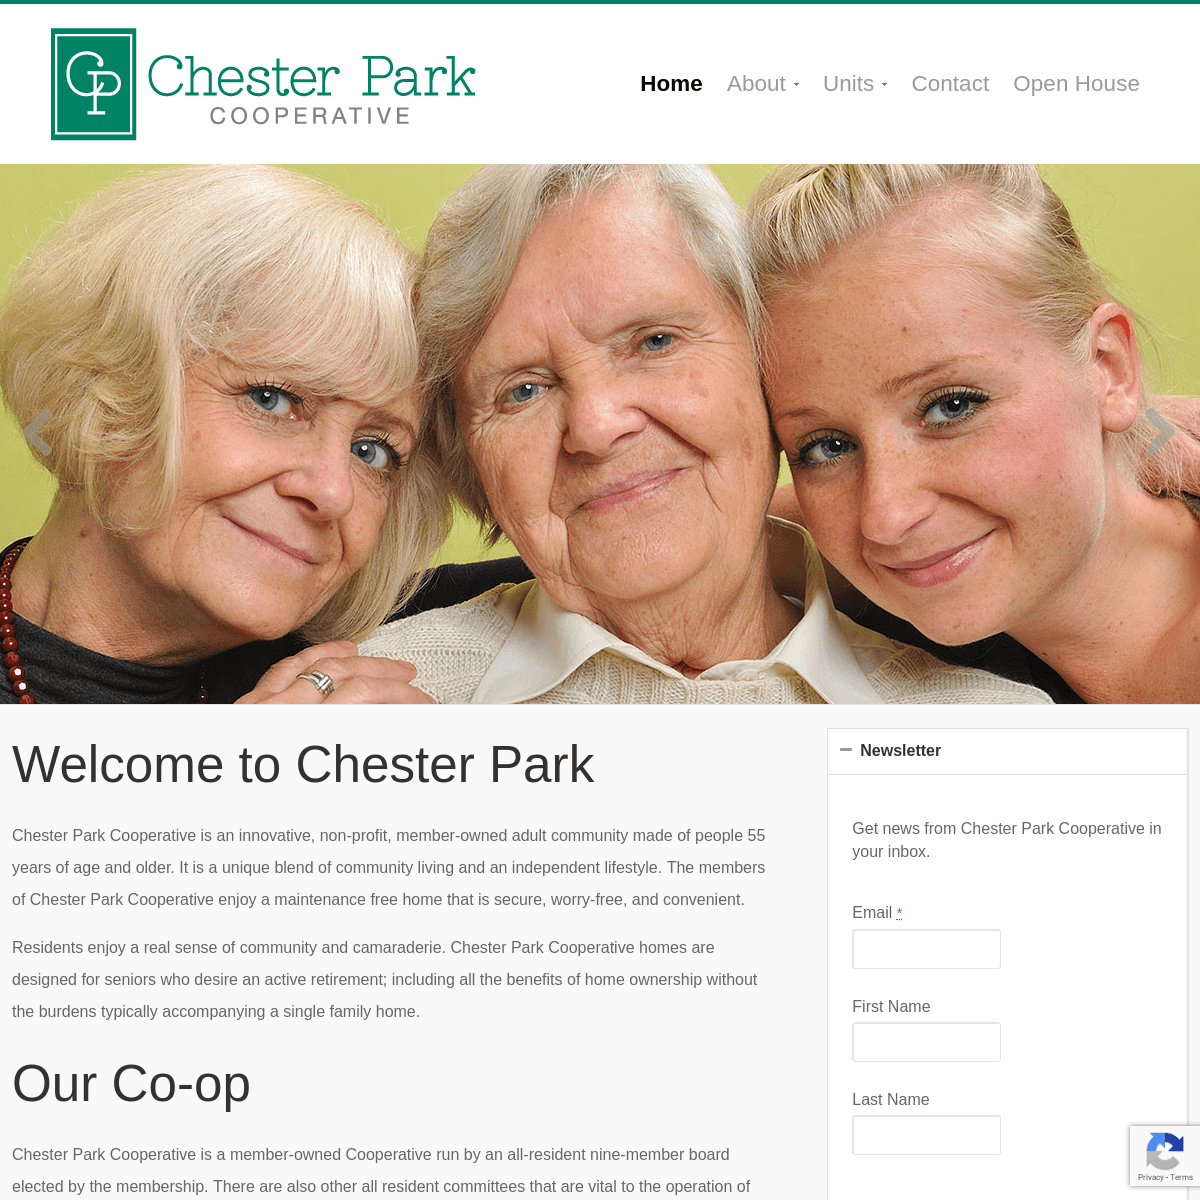 A complete backup of chesterparkcoop.com